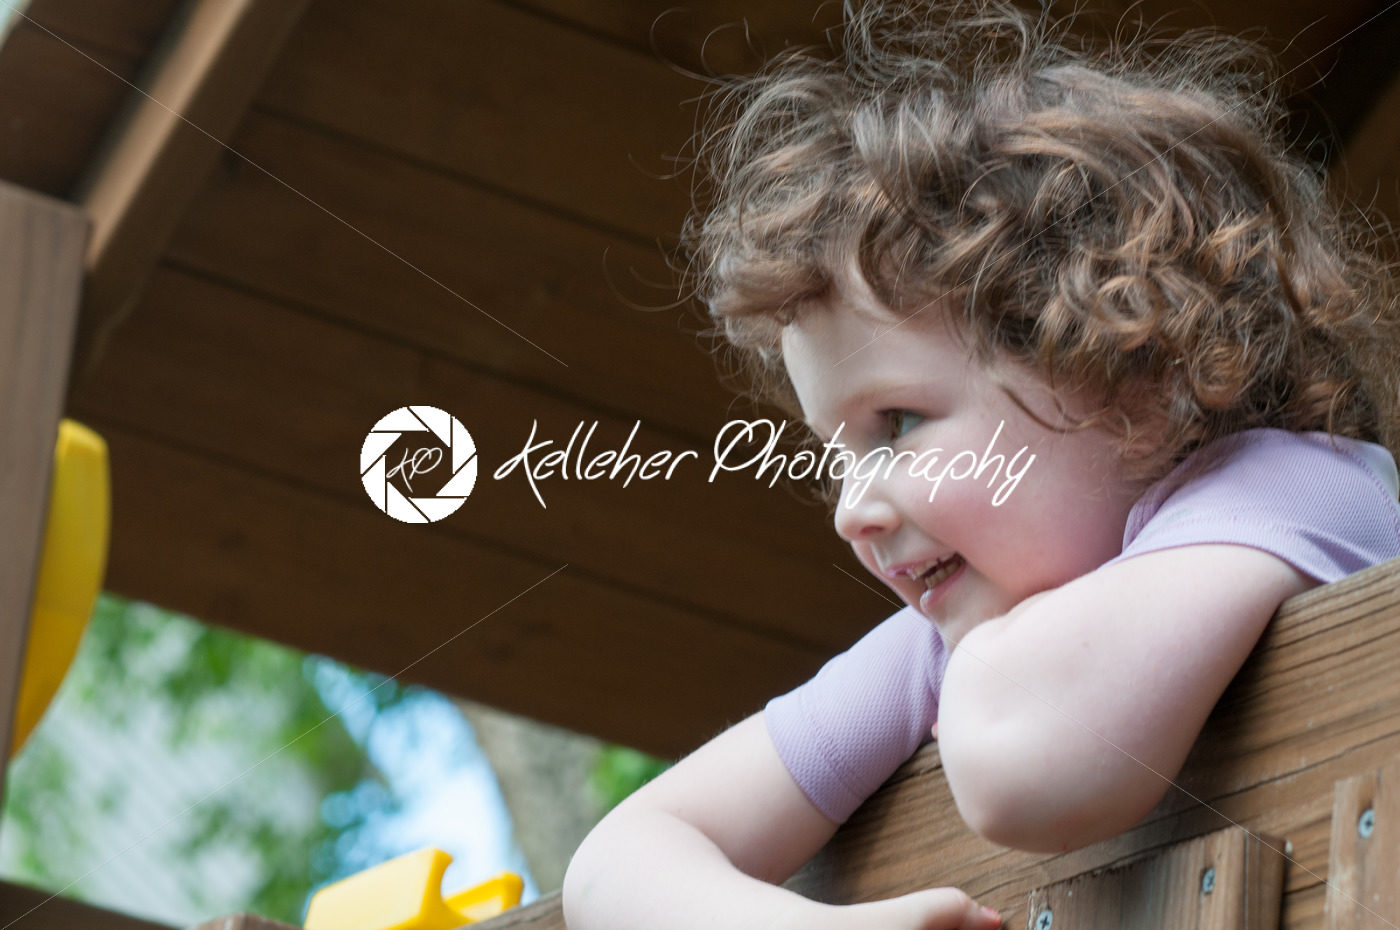 Young girl having fun on a swing set - Kelleher Photography Store